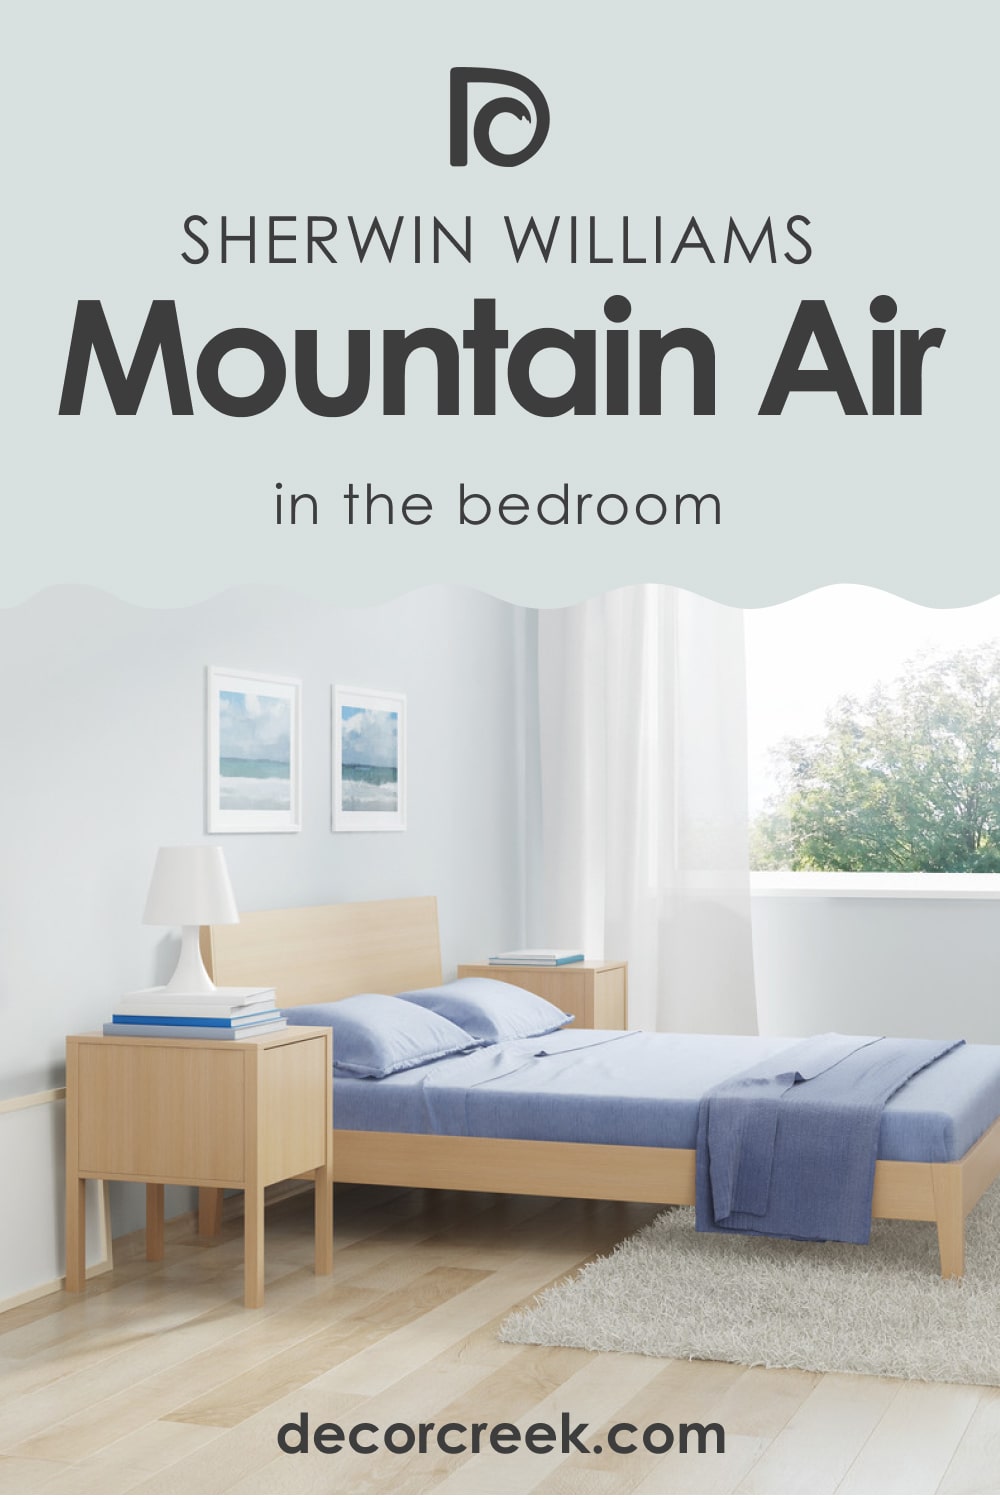 SW Mountain Air in the Bedroom